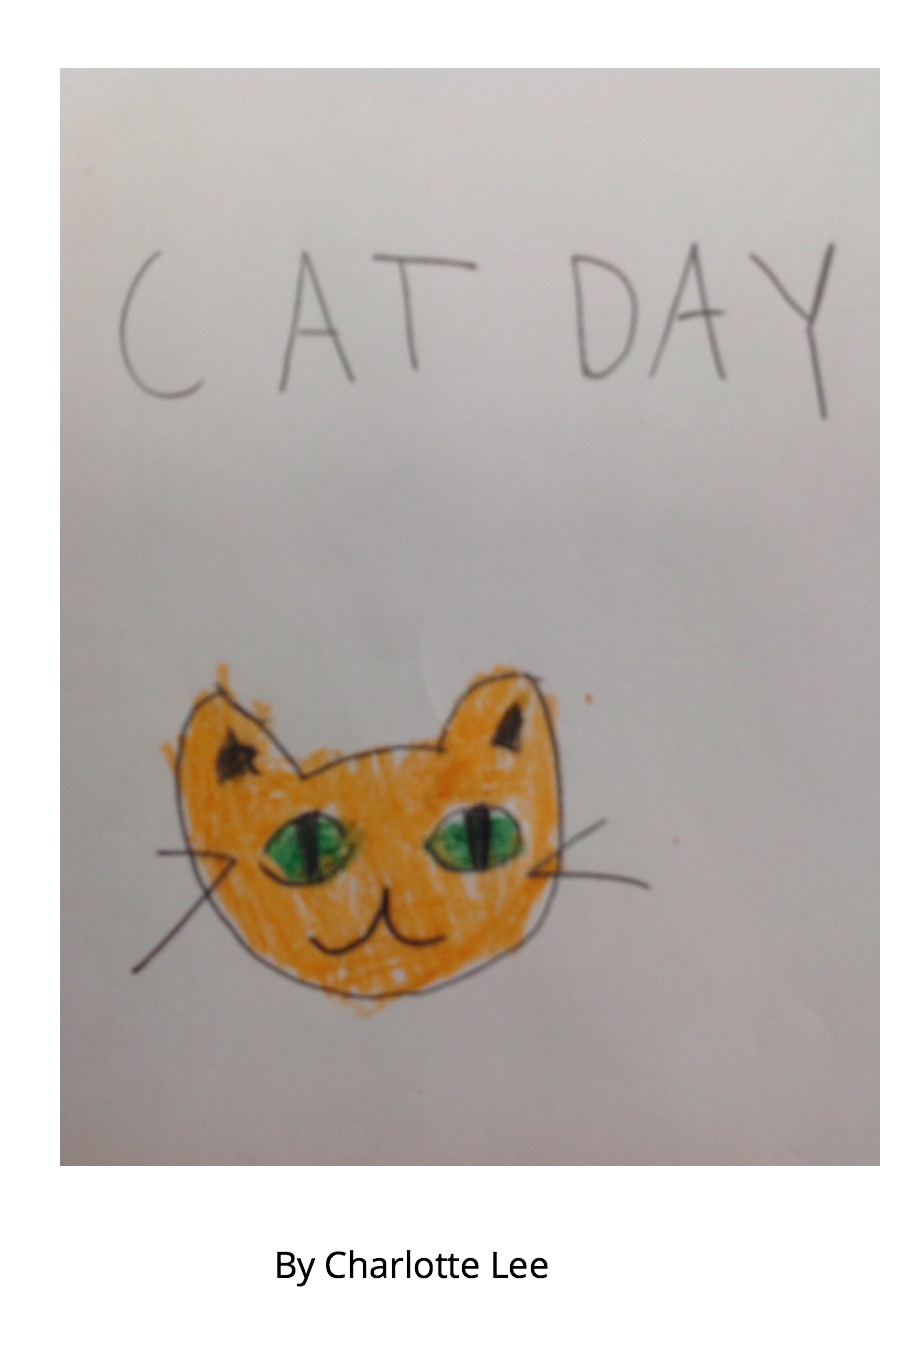 Cat Day by Charlotte L